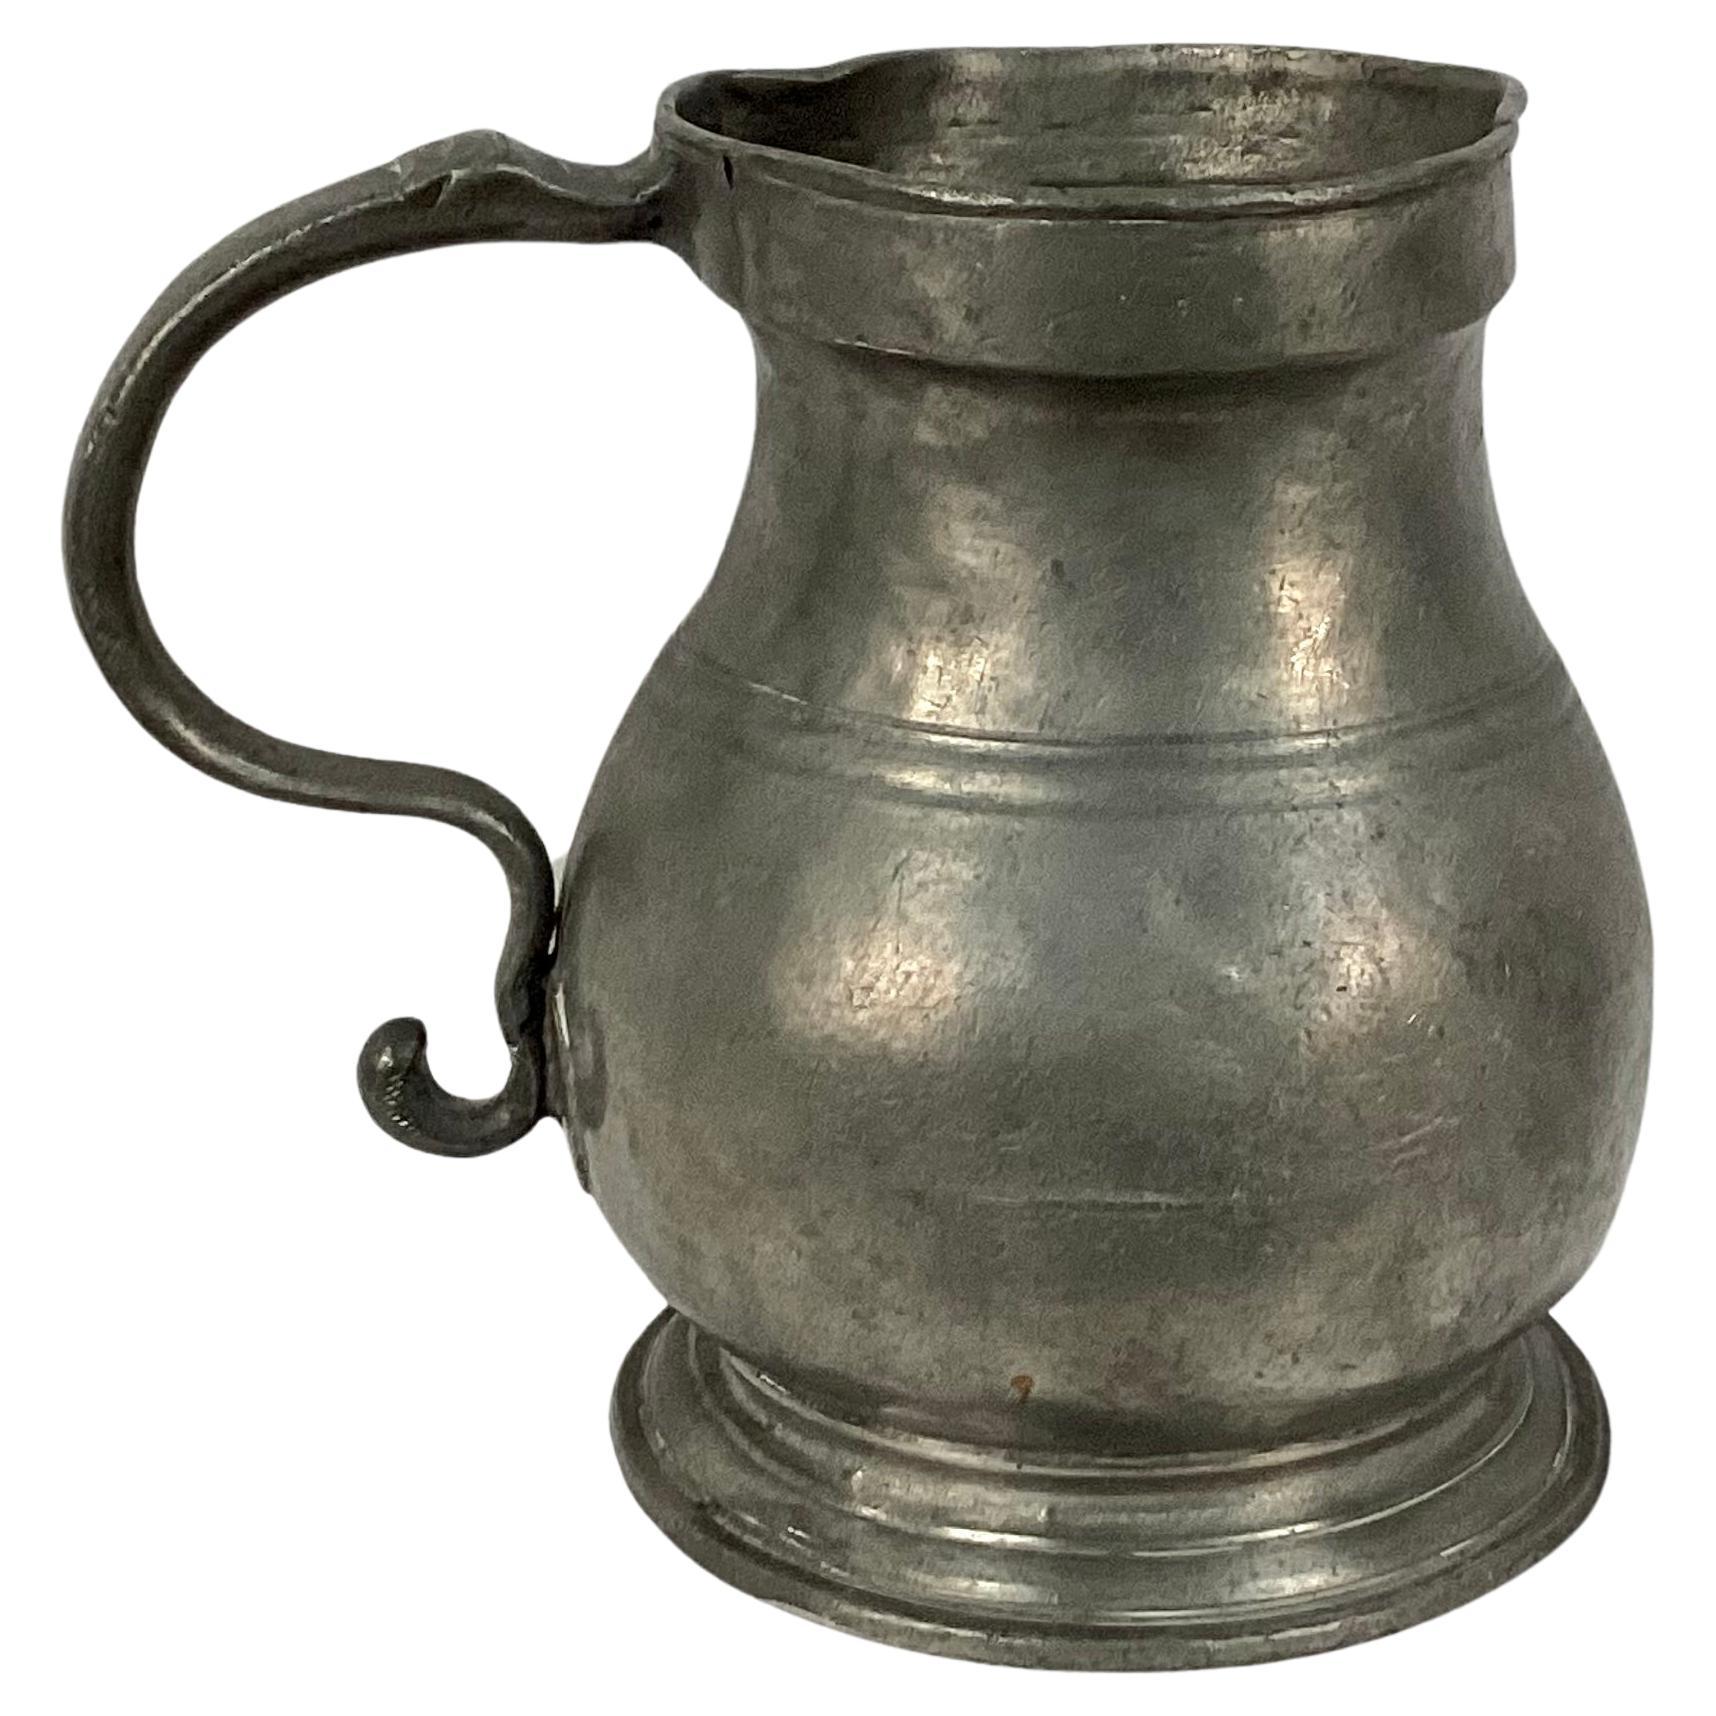  19th century pewter pitcher with pewter handle. Etched on underside is name 'Colodny'. Weighs approximately 4 pounds. Wonderful old patina.  No markings identified. 